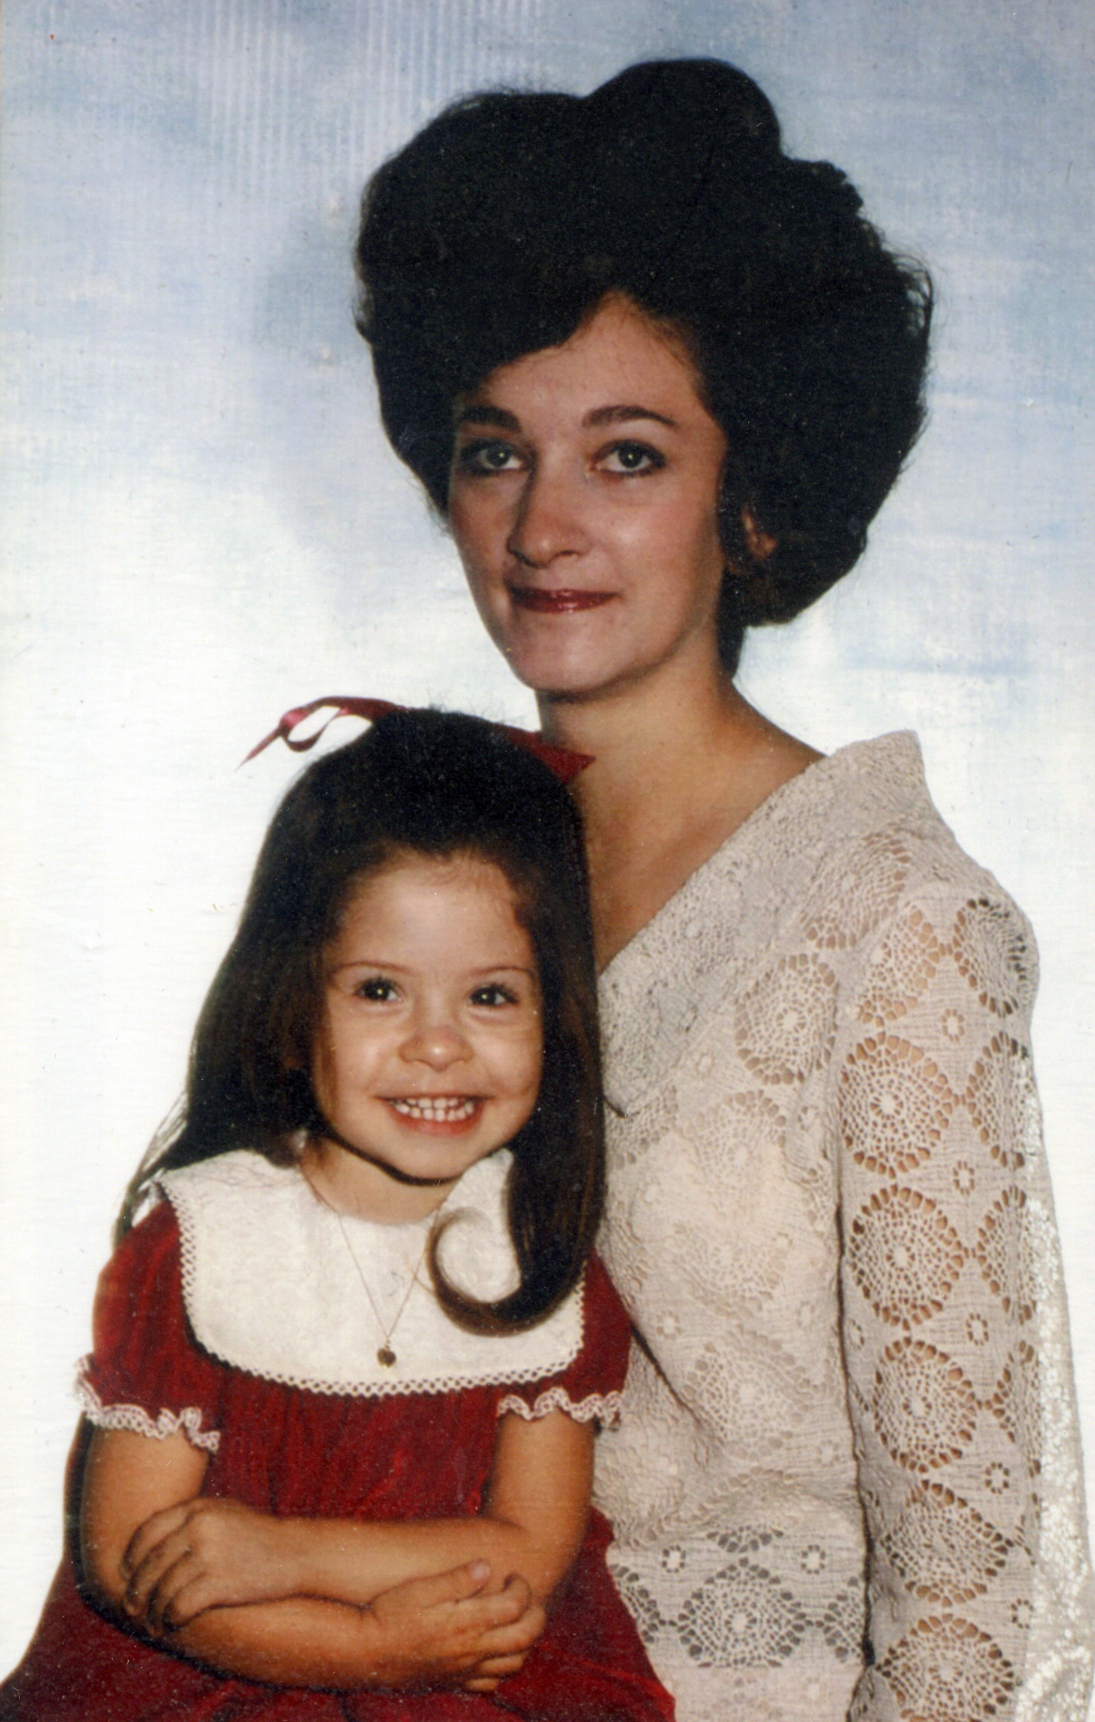 Wendy Solberg and her mother, Sandra Price, 1968